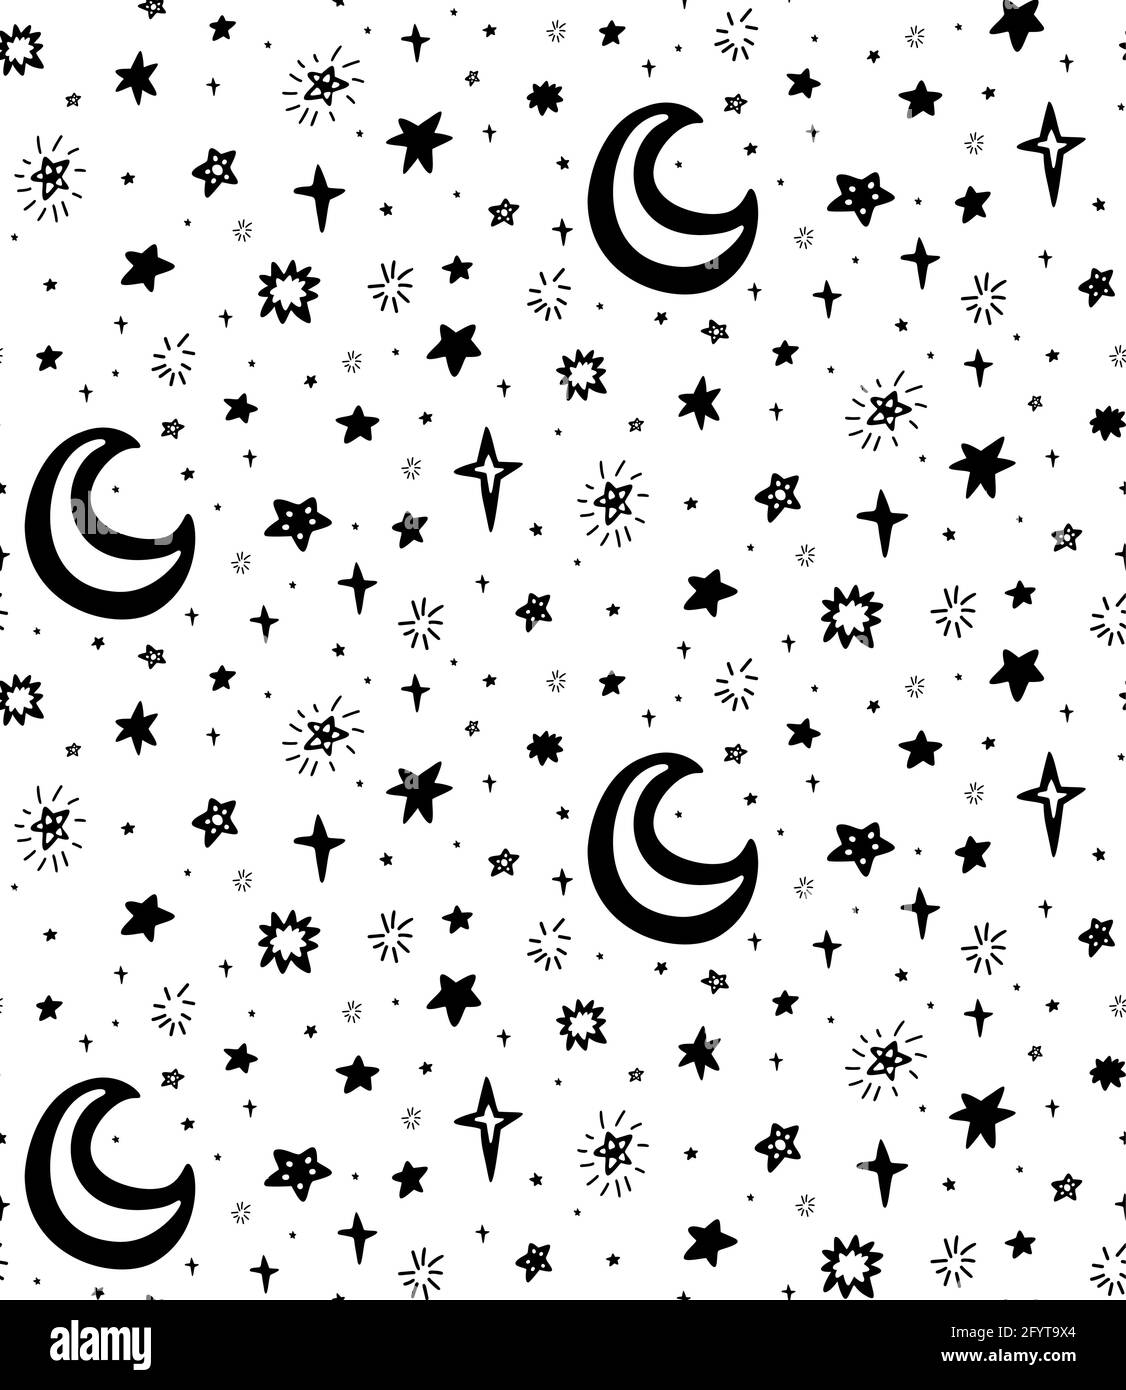 Seamless childish cosmos pattern with black silhouette of stars and moon on white background. Vector monochrome texture of the universe with dots. Vec Stock Vector